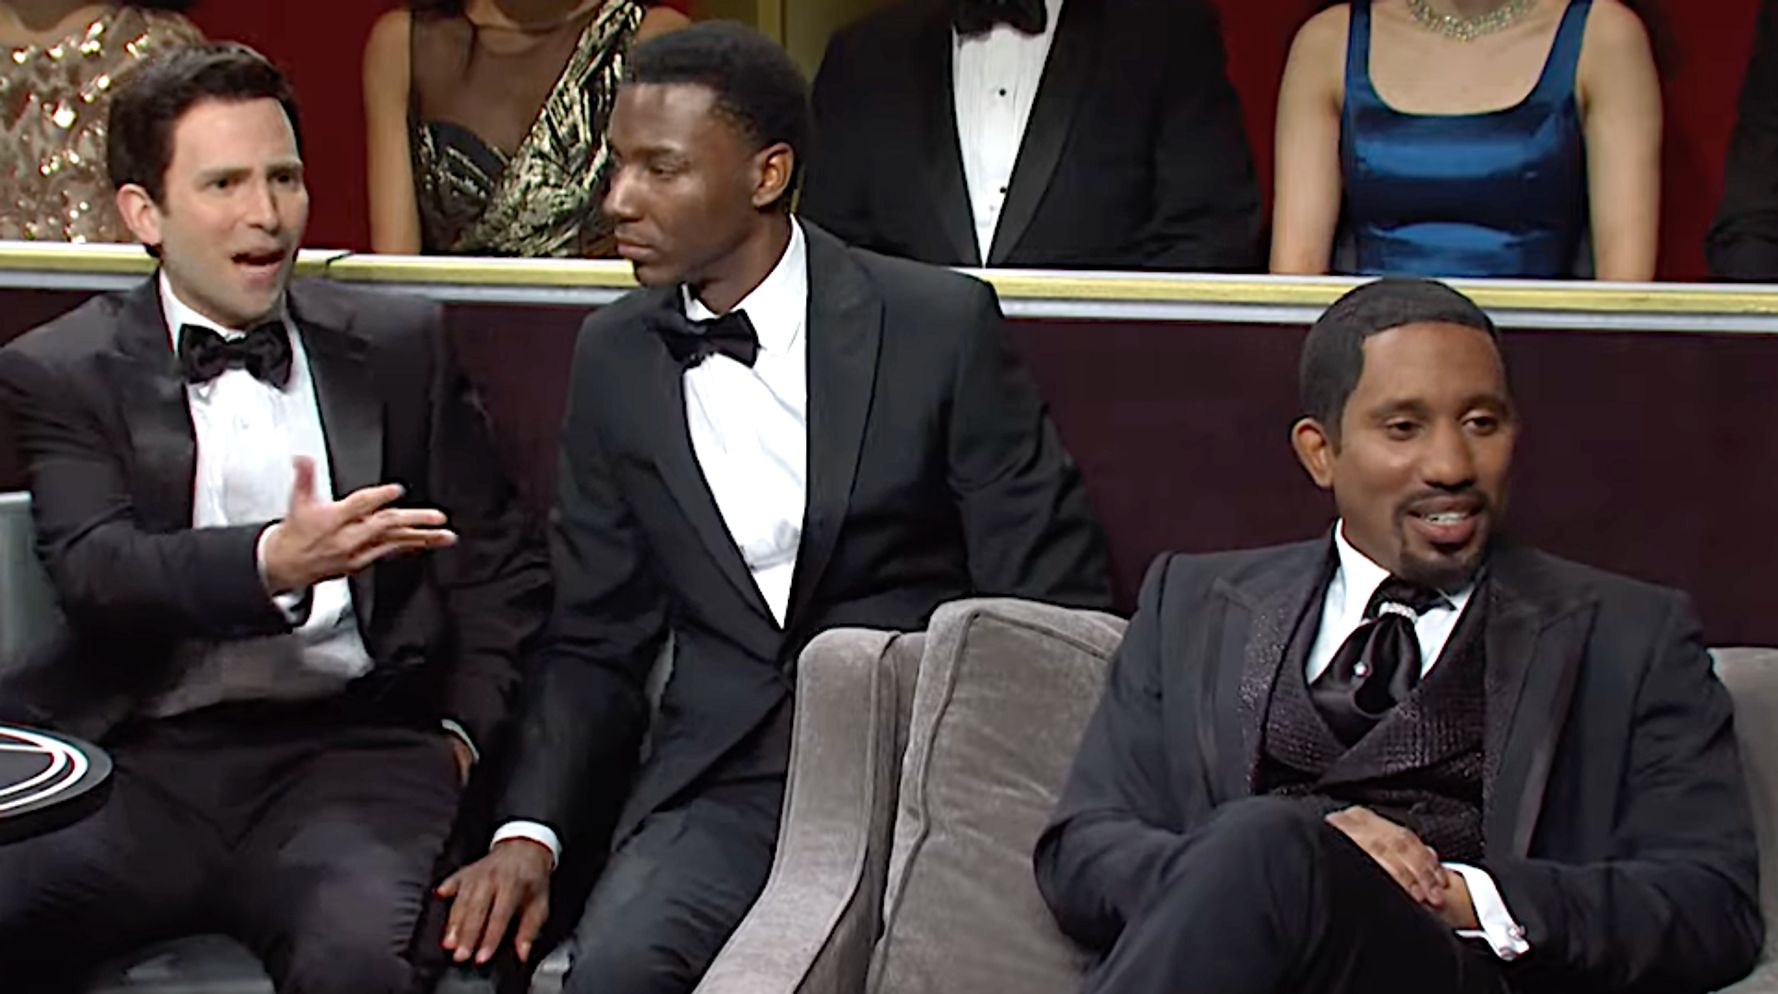 'Will Smith' Super Fans Scared Witless At Oscars After Slap In 'SNL' Sketch